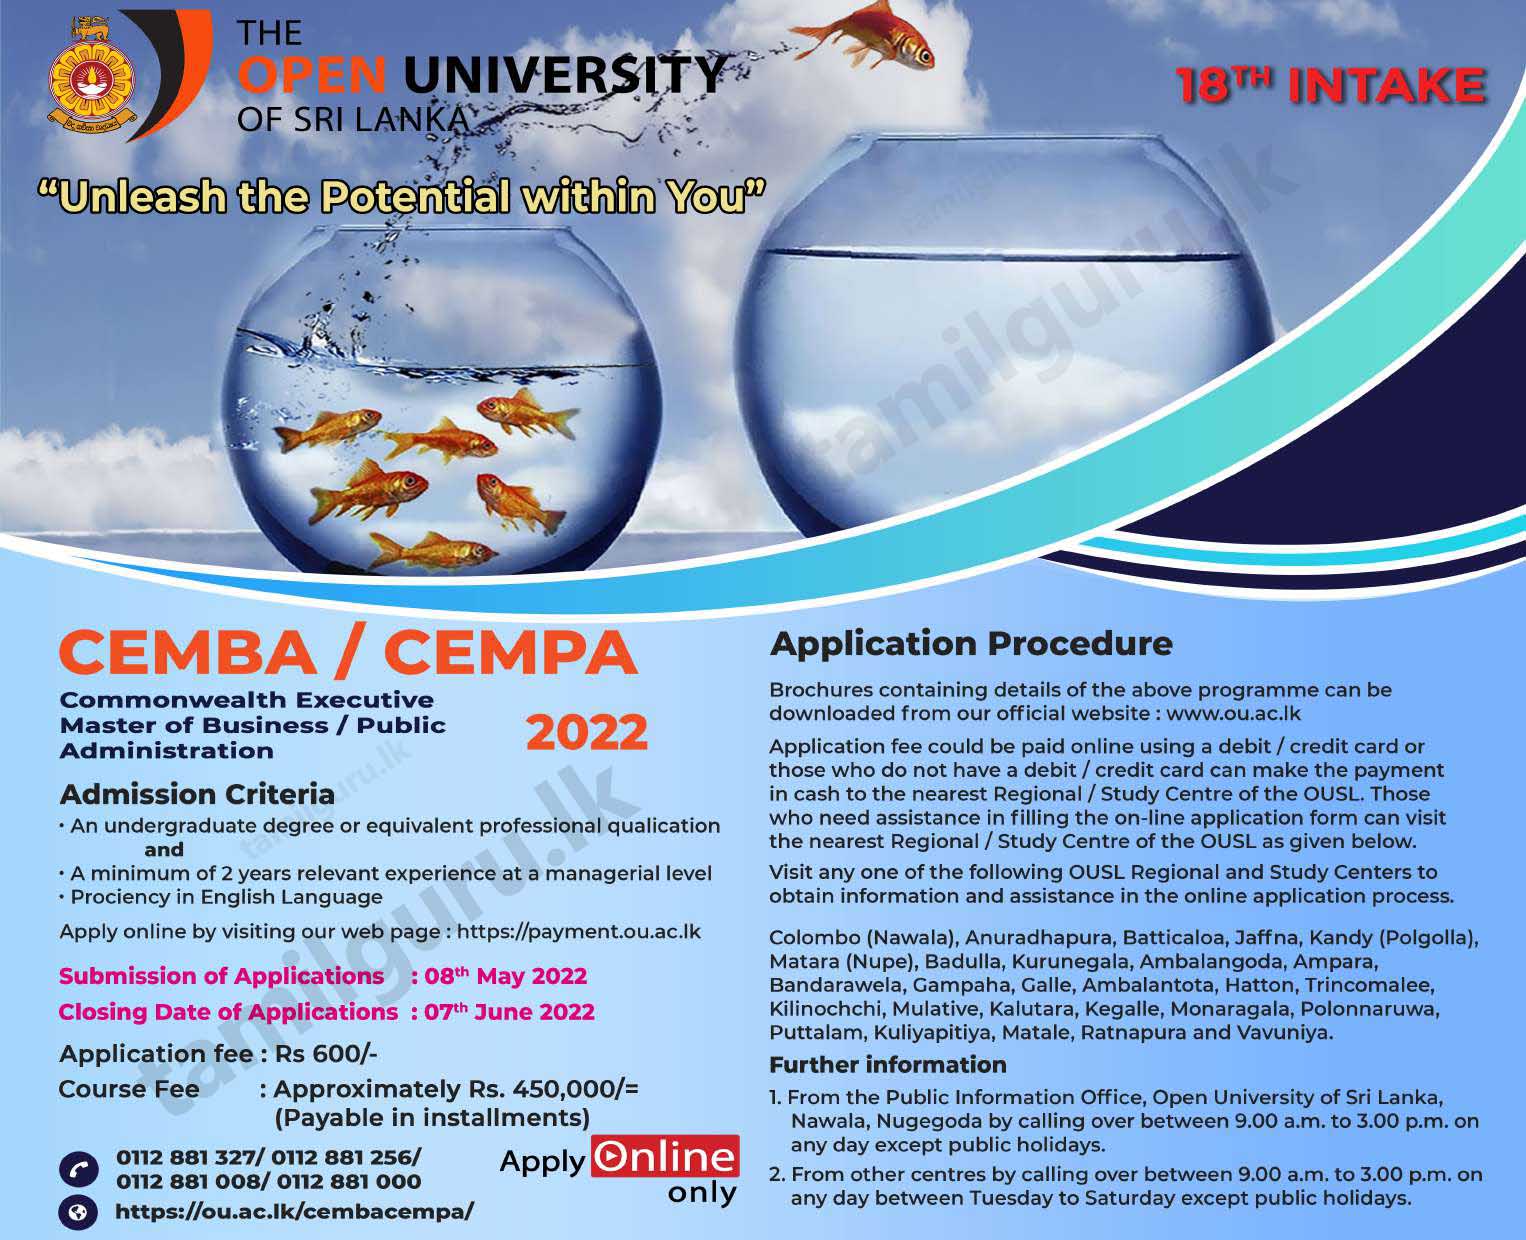 Calling Applications for Commonwealth Executive Master of Business Administration / Public Administration (MBA/MPA) - Open University of Sri Lanka